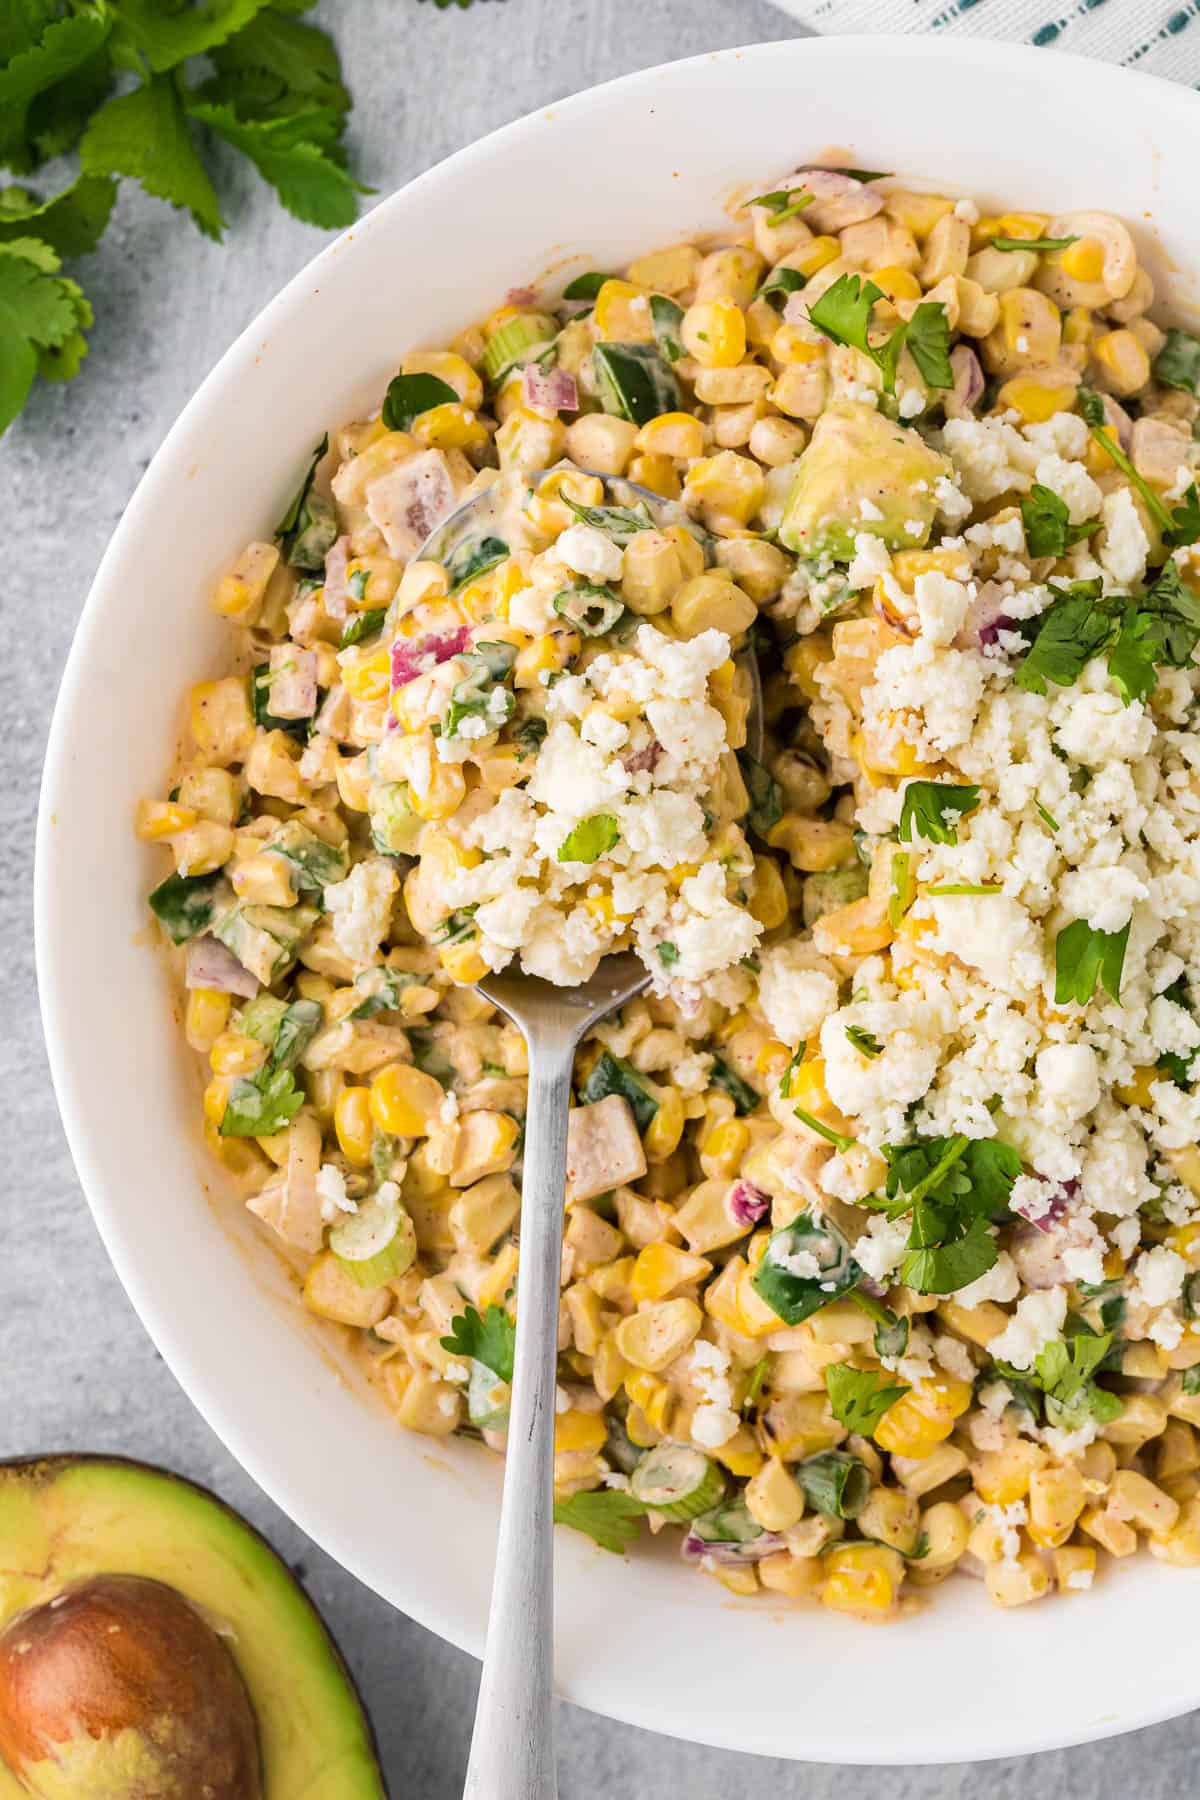 serving up some homemade Mexican street corn salad.